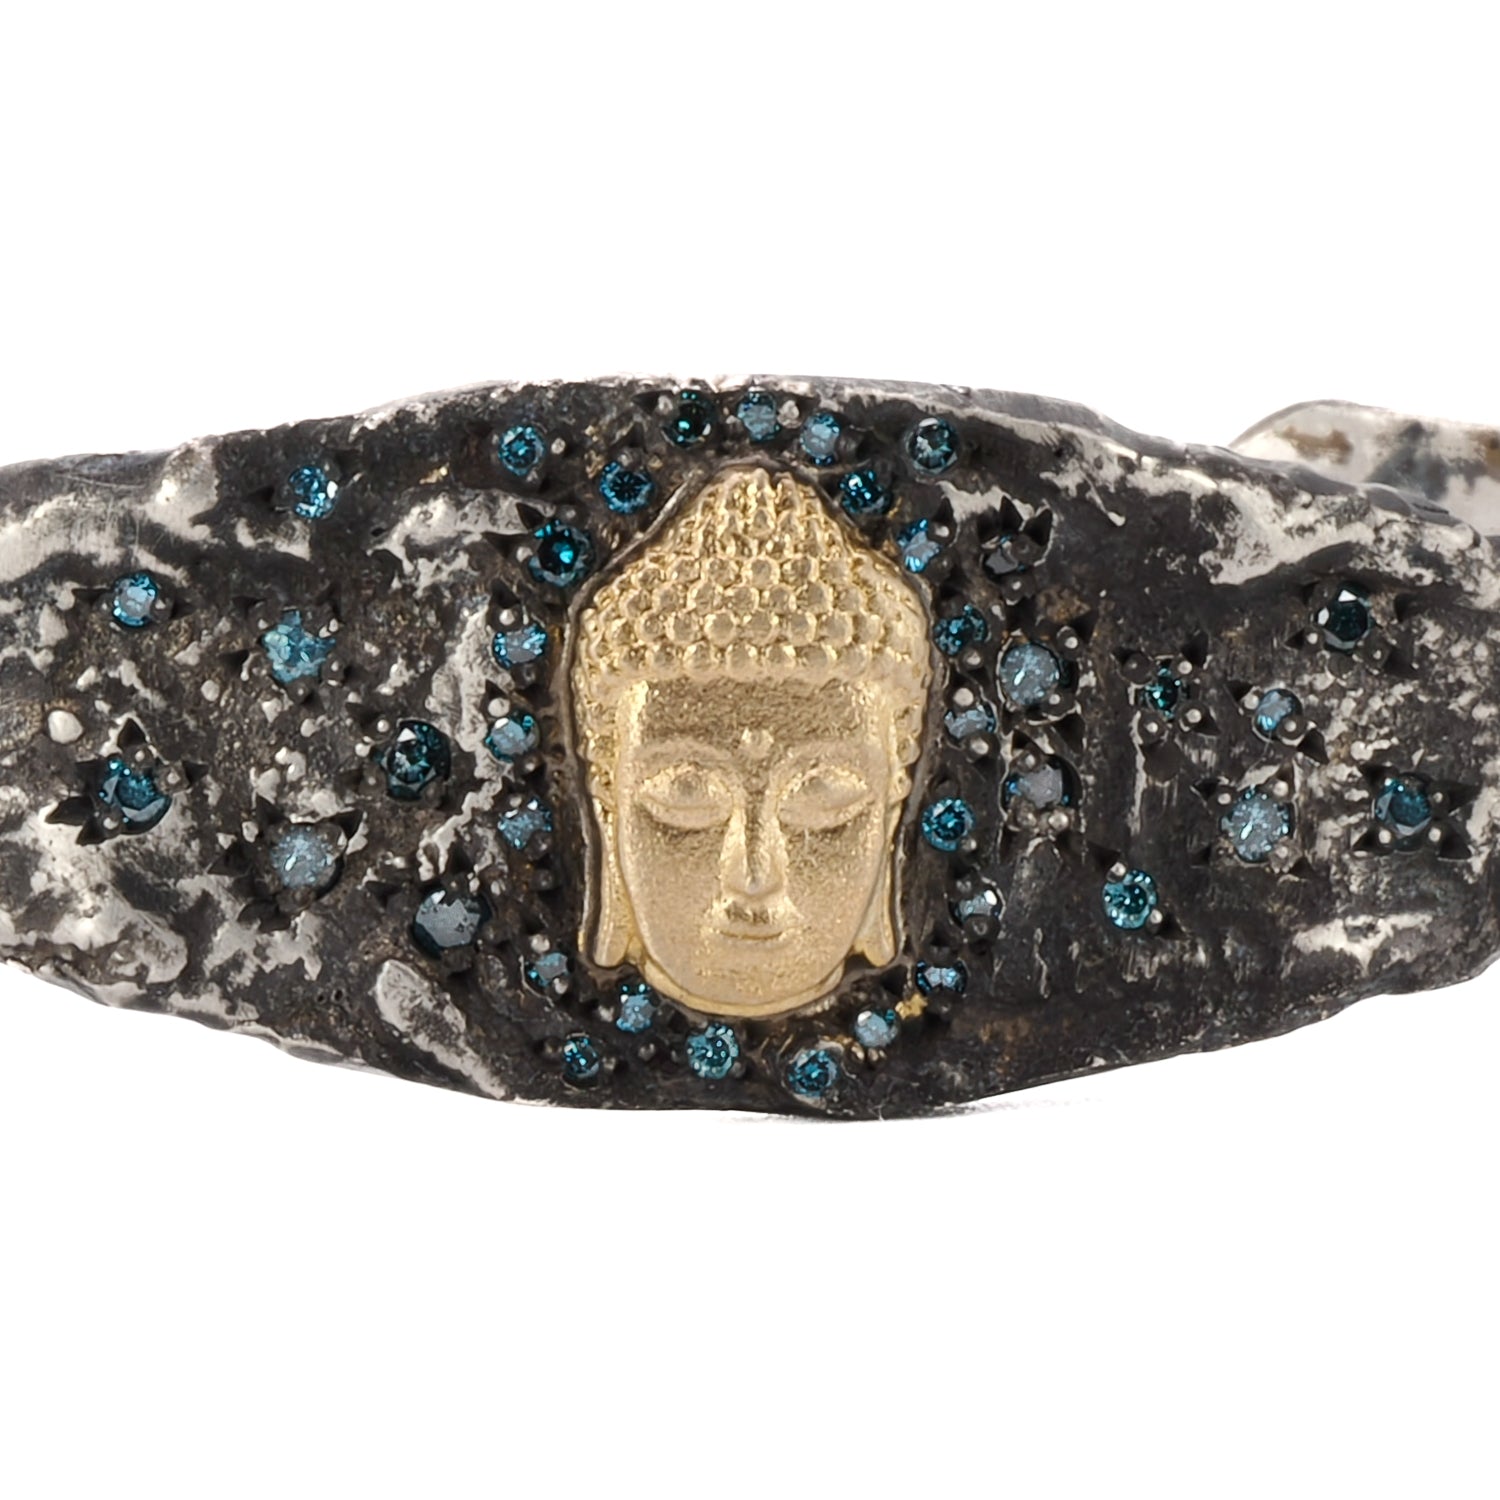 Blue Diamond Buddha Bracelet - Elevate your style with this handcrafted bangle bracelet featuring a Buddha charm, 14k gold accents, and stunning blue diamonds for a touch of glamour.